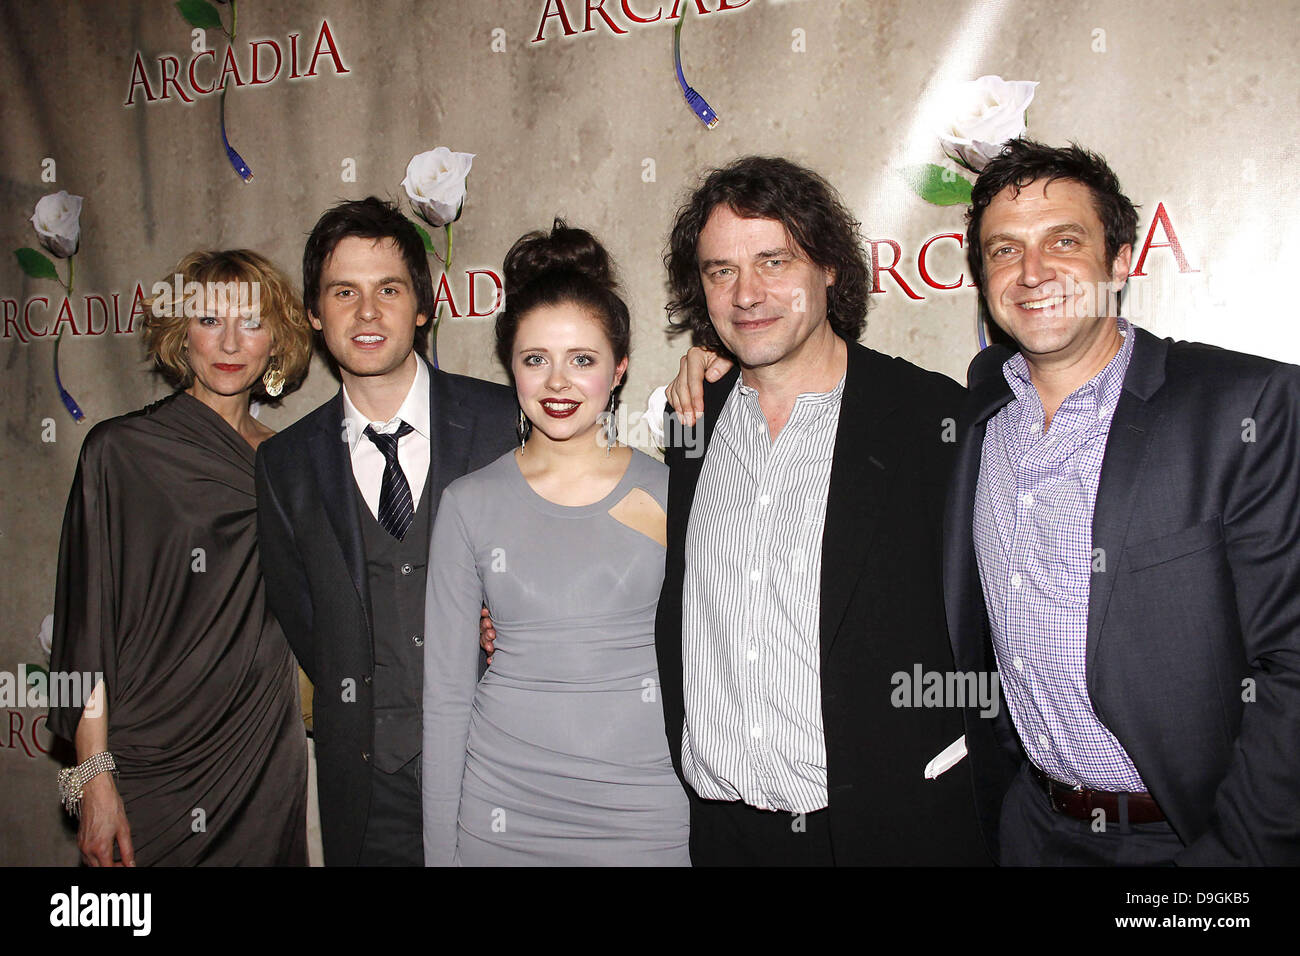 Lia Williams, Tom Riley, Bel Powley, David Leveaux and Raul Esparza  Opening night after party for the Broadway production of 'Tom Stoppard's Arcadia' held at Gotham Hall. New York City, USA - 17.03.11 Stock Photo